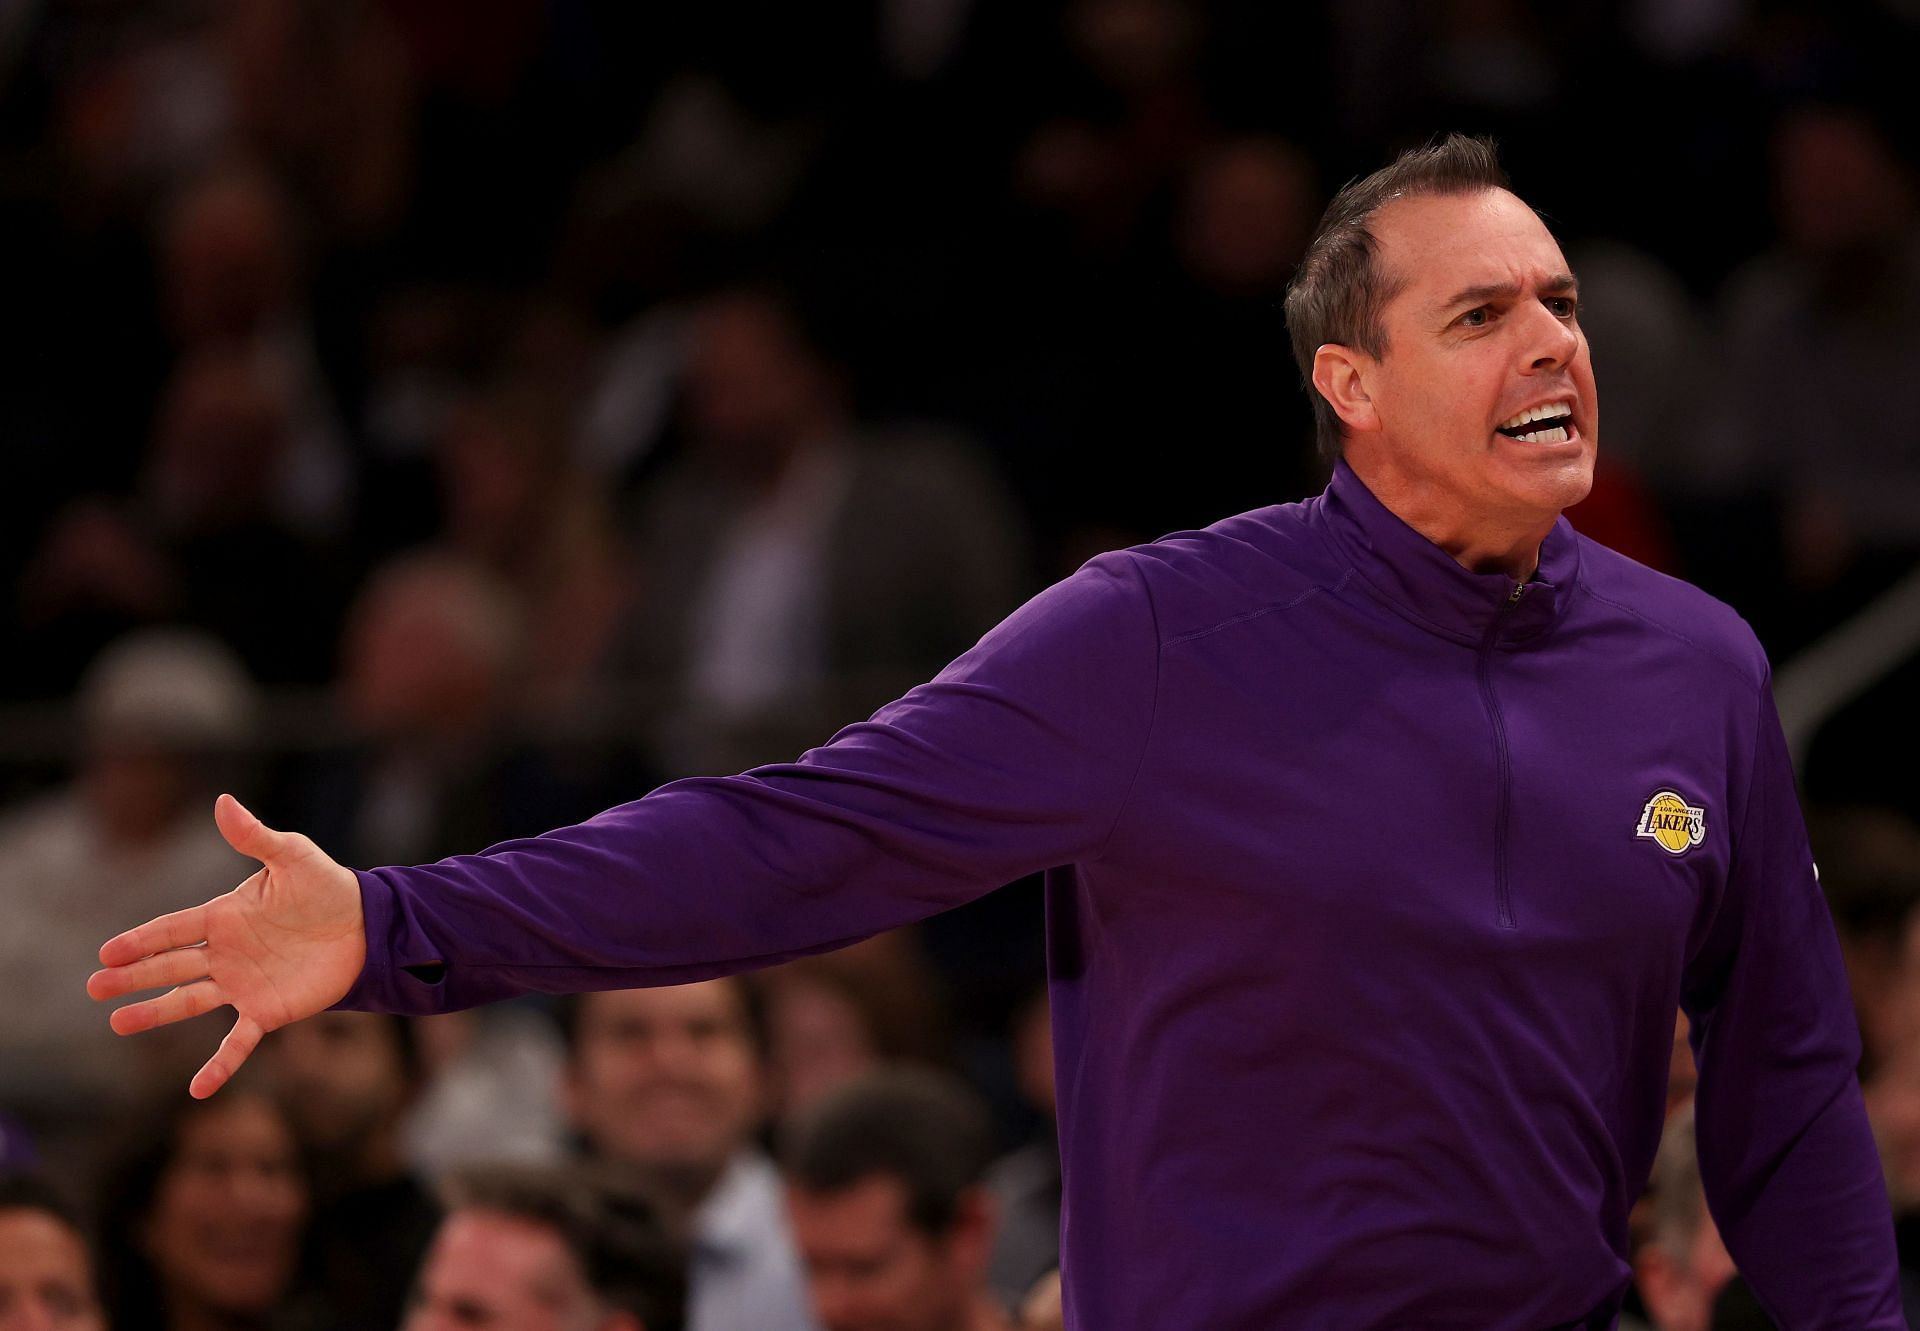 LA Lakers head coach Frank Vogel reacts to a foul call during a game